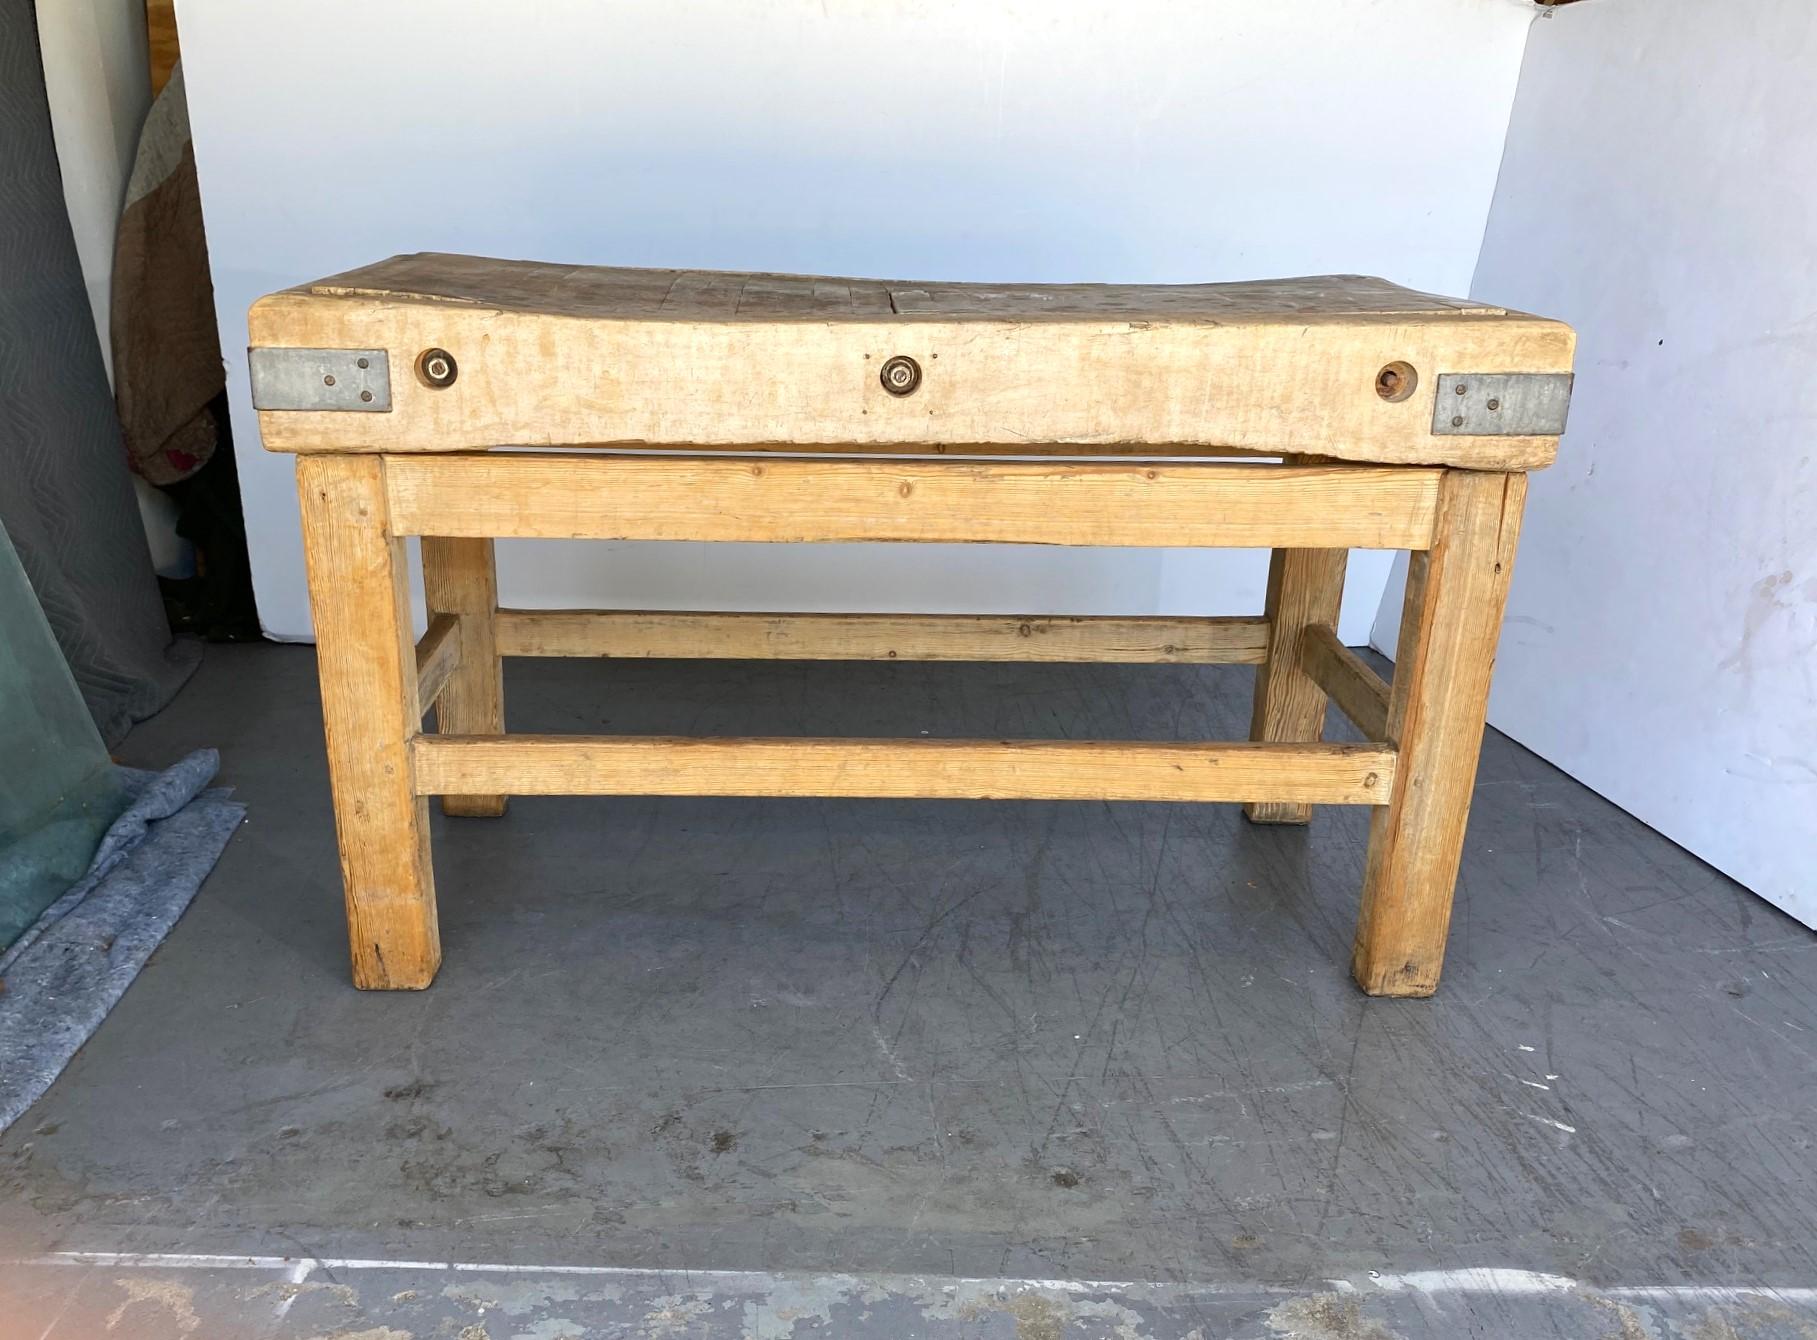  19th-century hand-crafted butcher's block sits atop a pine base which is very sturdy, with no movement at all. Iron straps at the corners and iron rods pass through the butcher block and lock it together. It is a beautiful piece that has gathered a